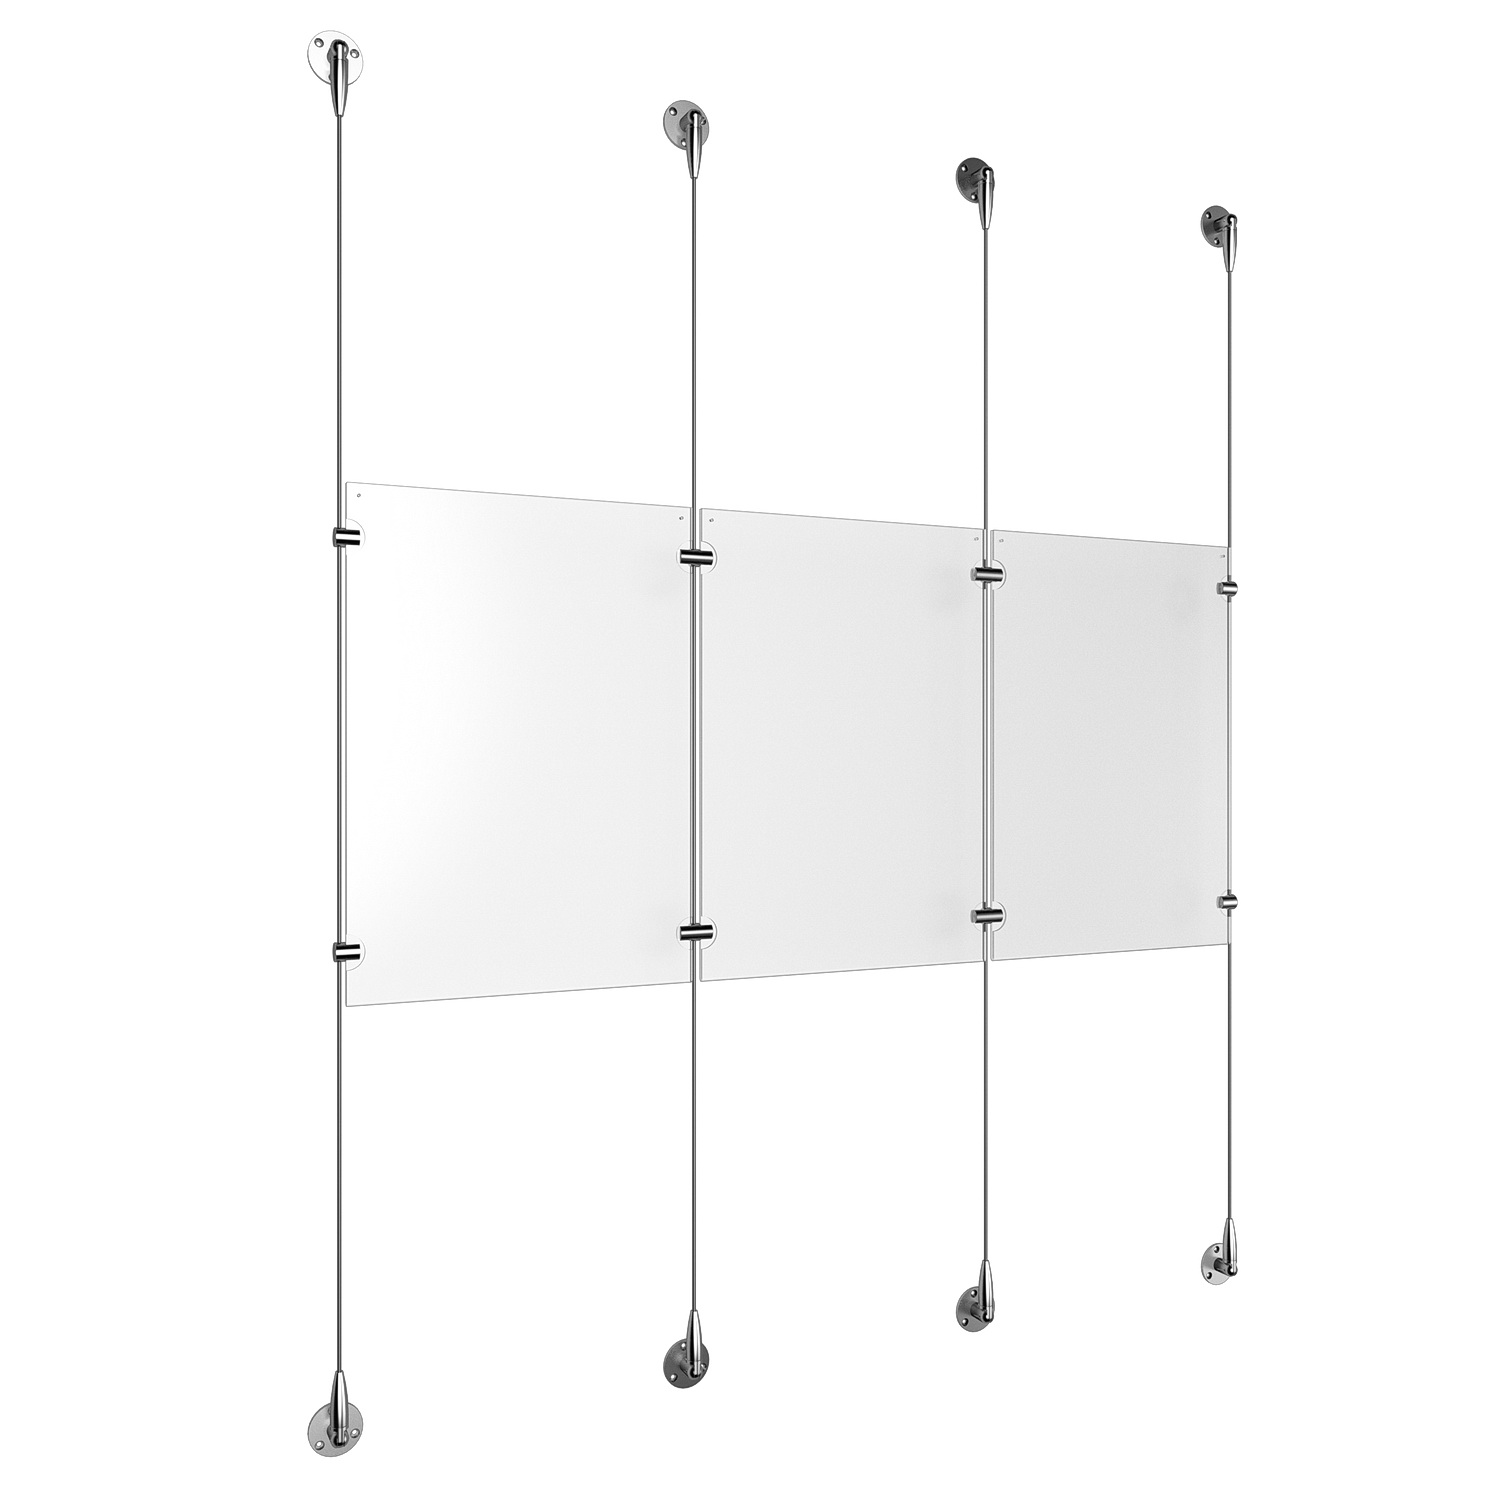 (3) 11'' Width x 17'' Height Clear Acrylic Frame & (4) Stainless Steel Satin Brushed Adjustable Angle Signature 1/8'' Cable Systems with (4) Single-Sided Panel Grippers (4) Double-Sided Panel Grippers